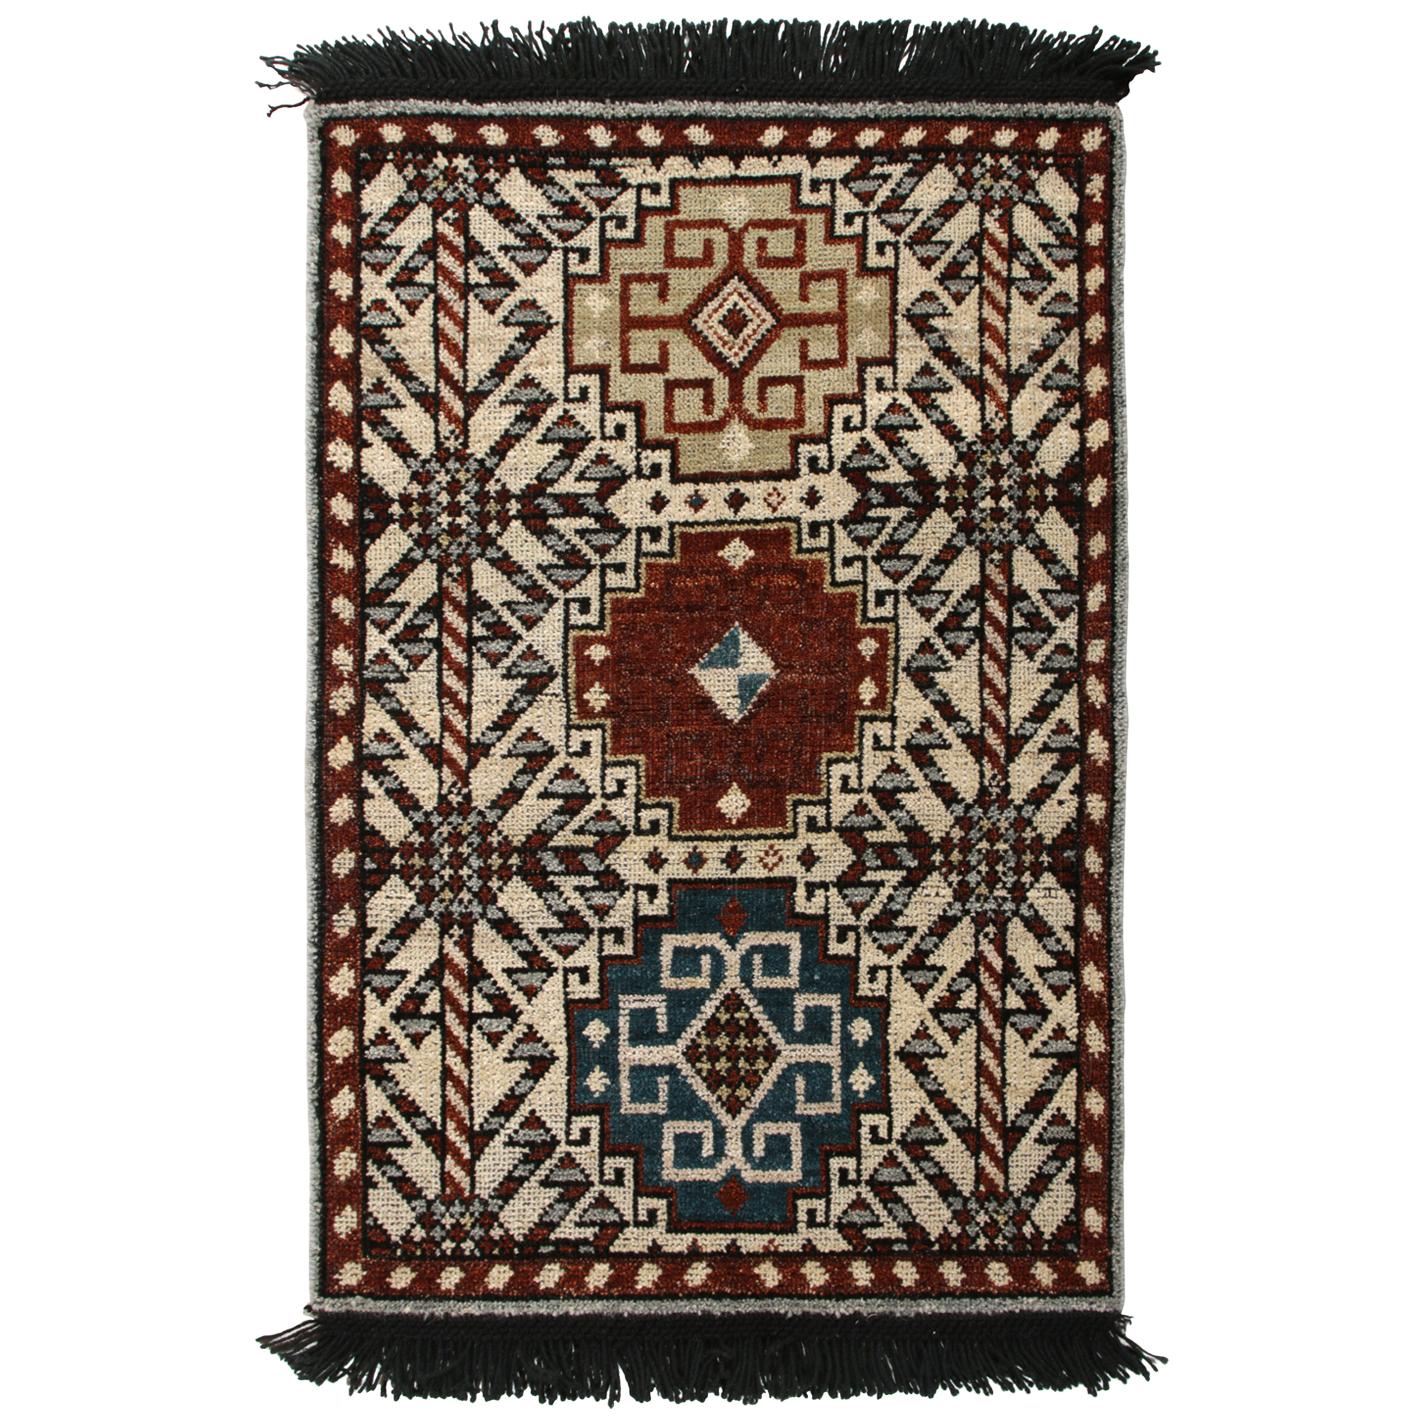 Rug & Kilim's Hand Knotted Qashqai Style Rug in Beige Red Geometric Pattern